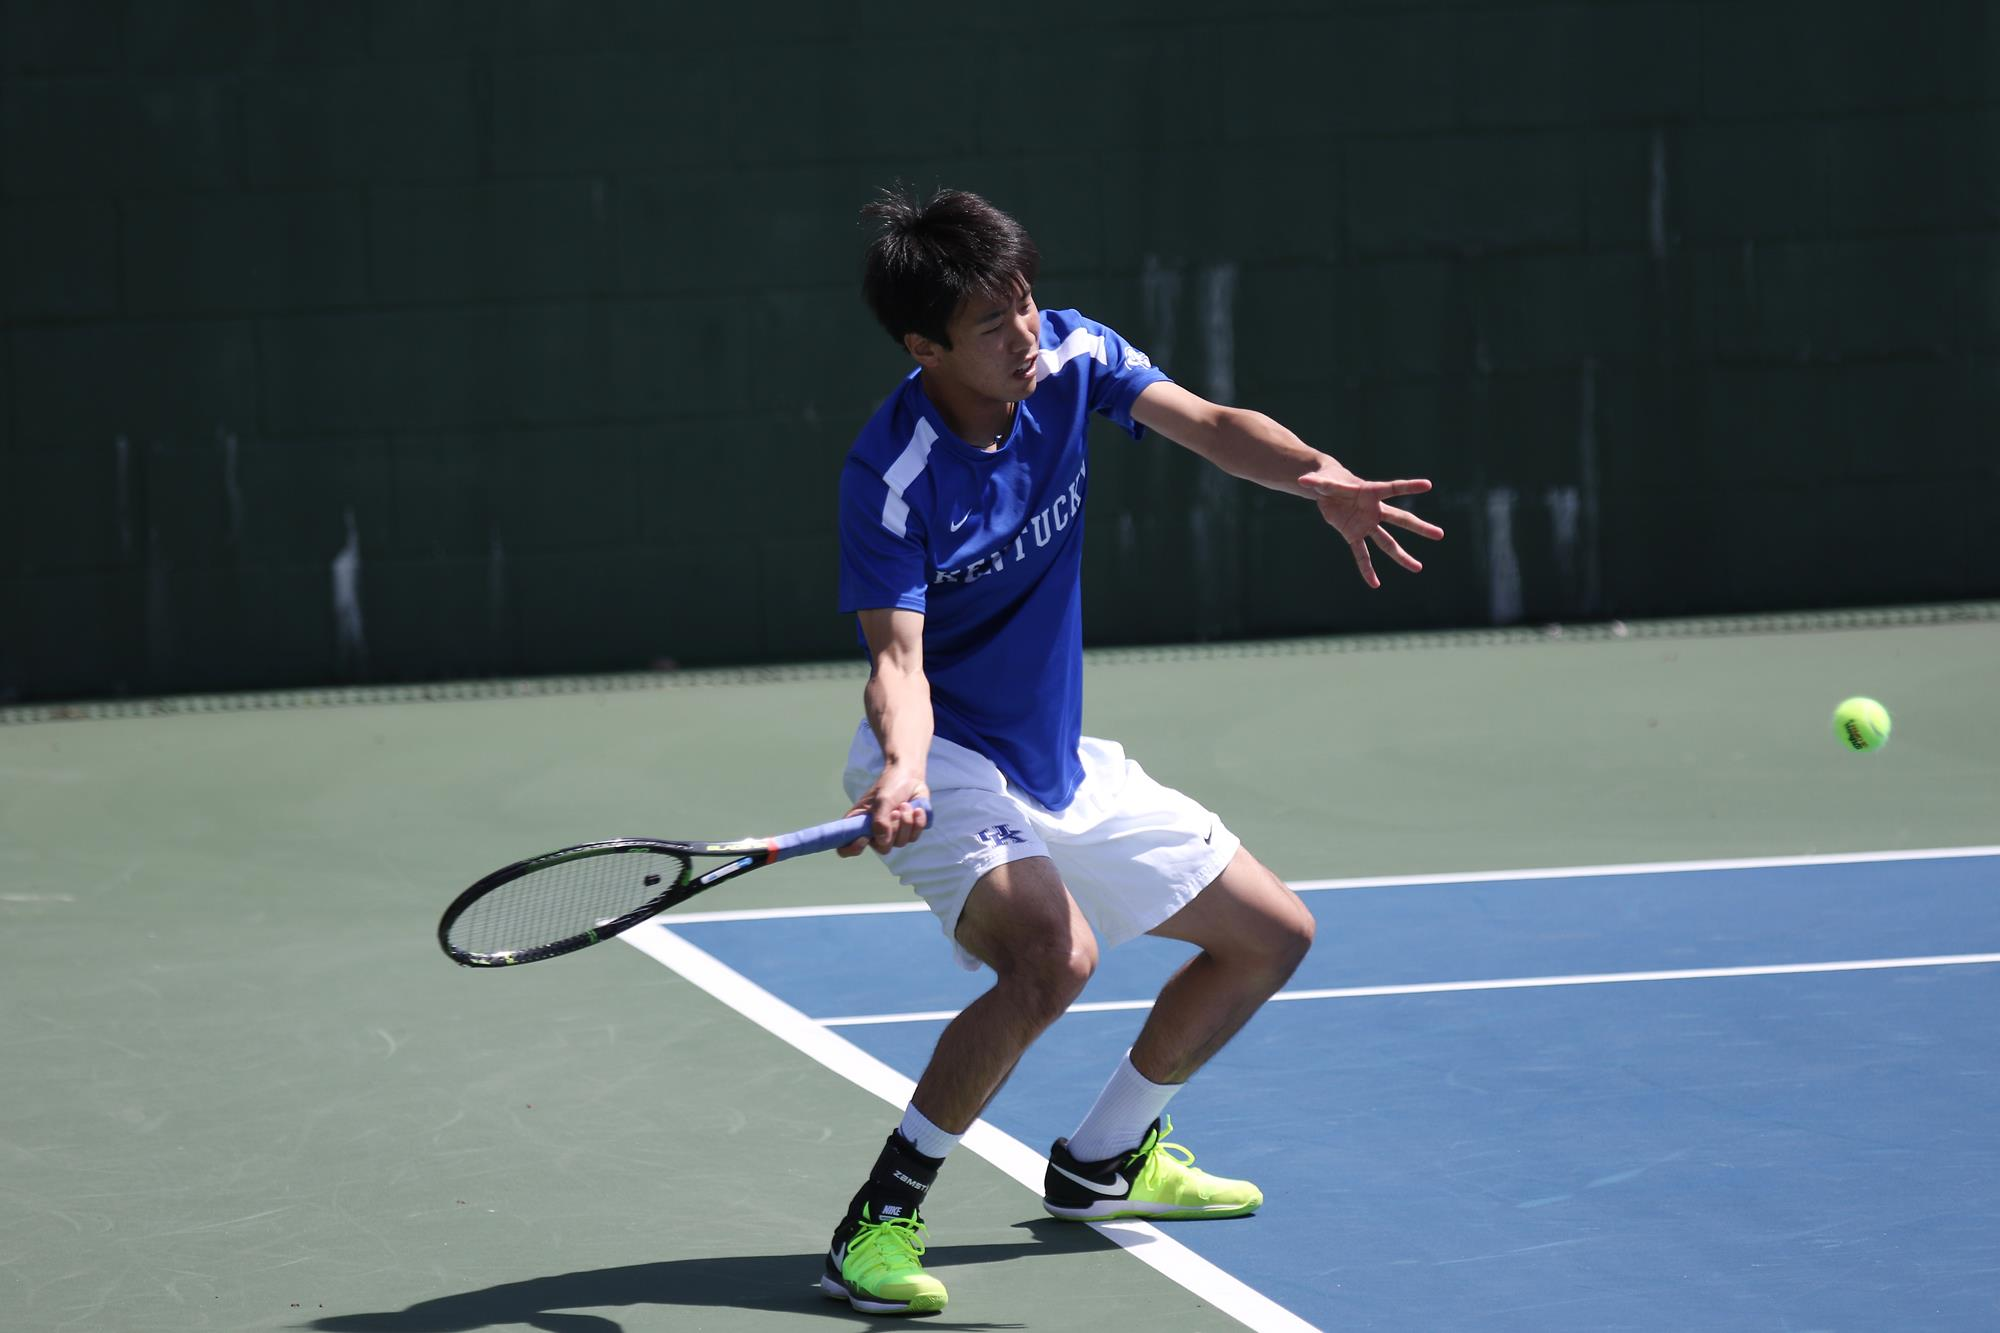 Kentucky Wraps Up Play at ITA National Fall Championships and Wake Forest Invitational